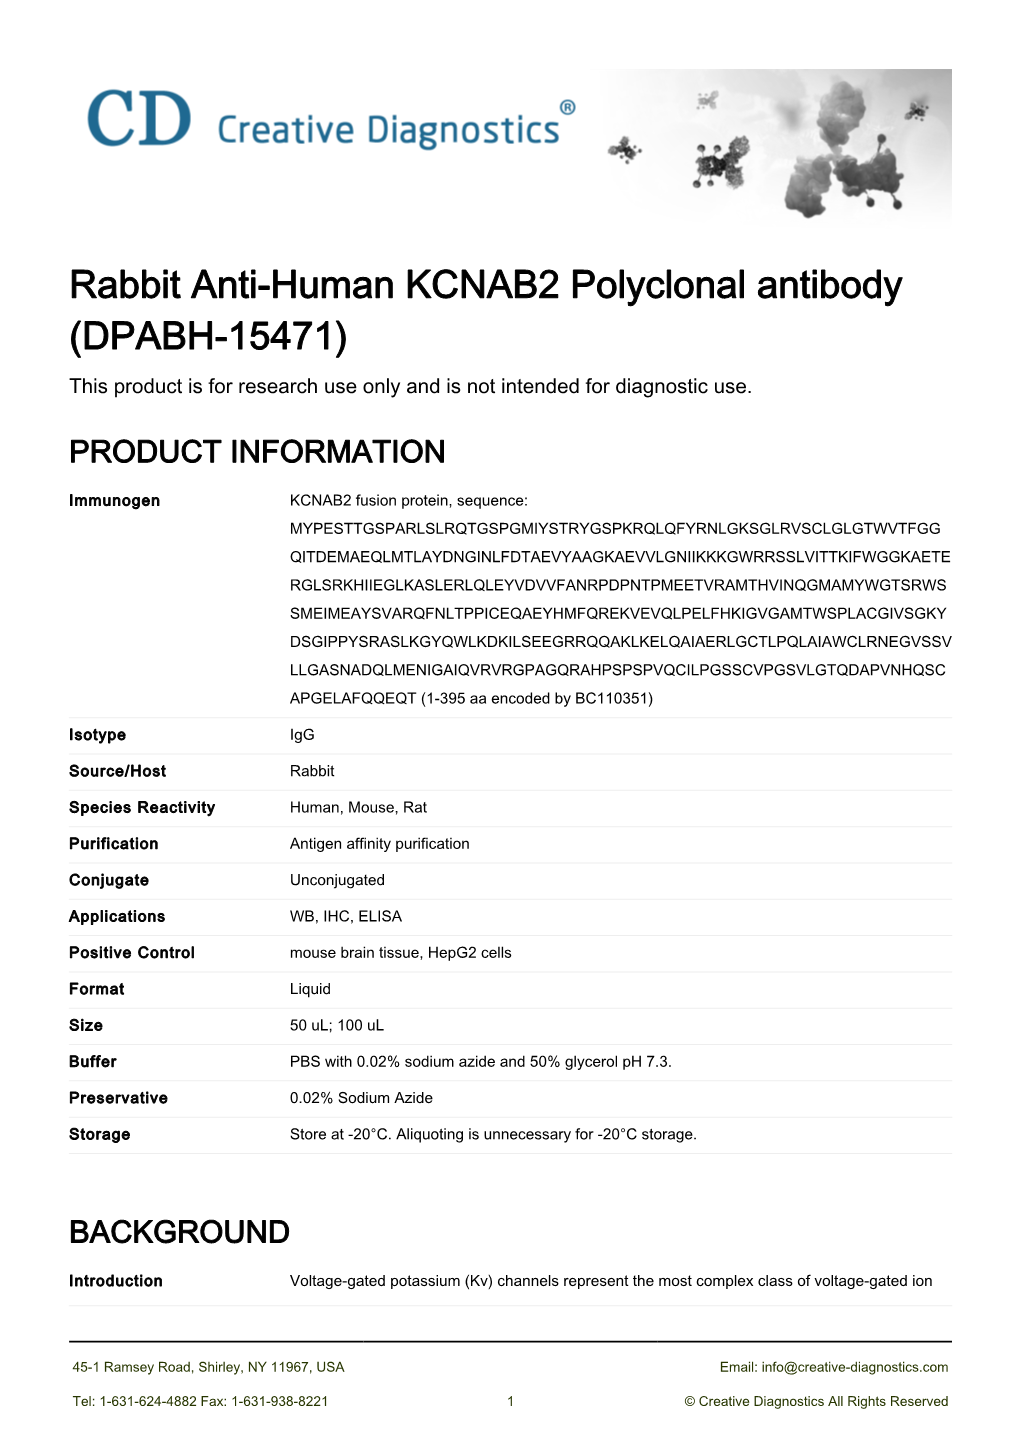 Rabbit Anti-Human KCNAB2 Polyclonal Antibody (DPABH-15471) This Product Is for Research Use Only and Is Not Intended for Diagnostic Use